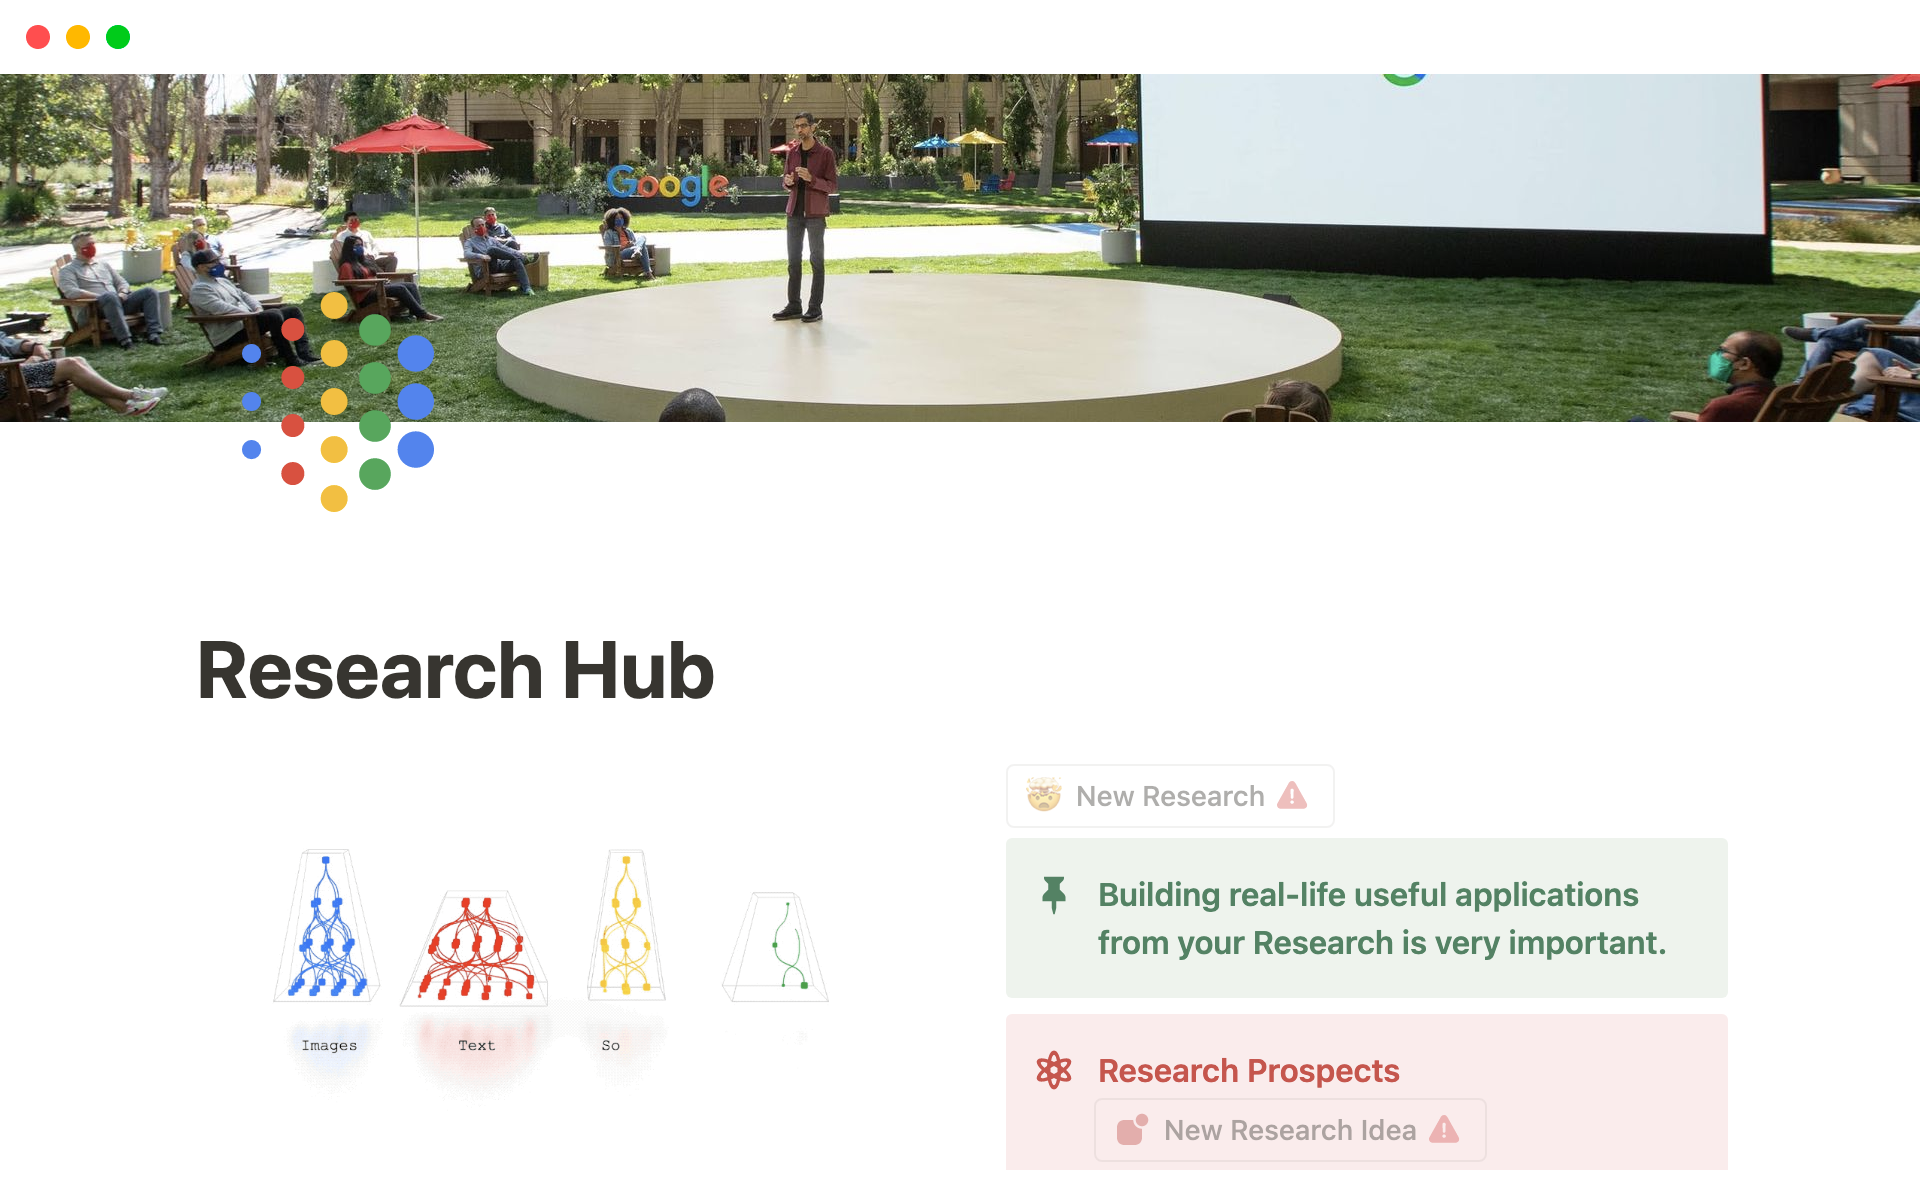 You will get a streamlined and organized platform for all your research-related content with Notion Research Hub.